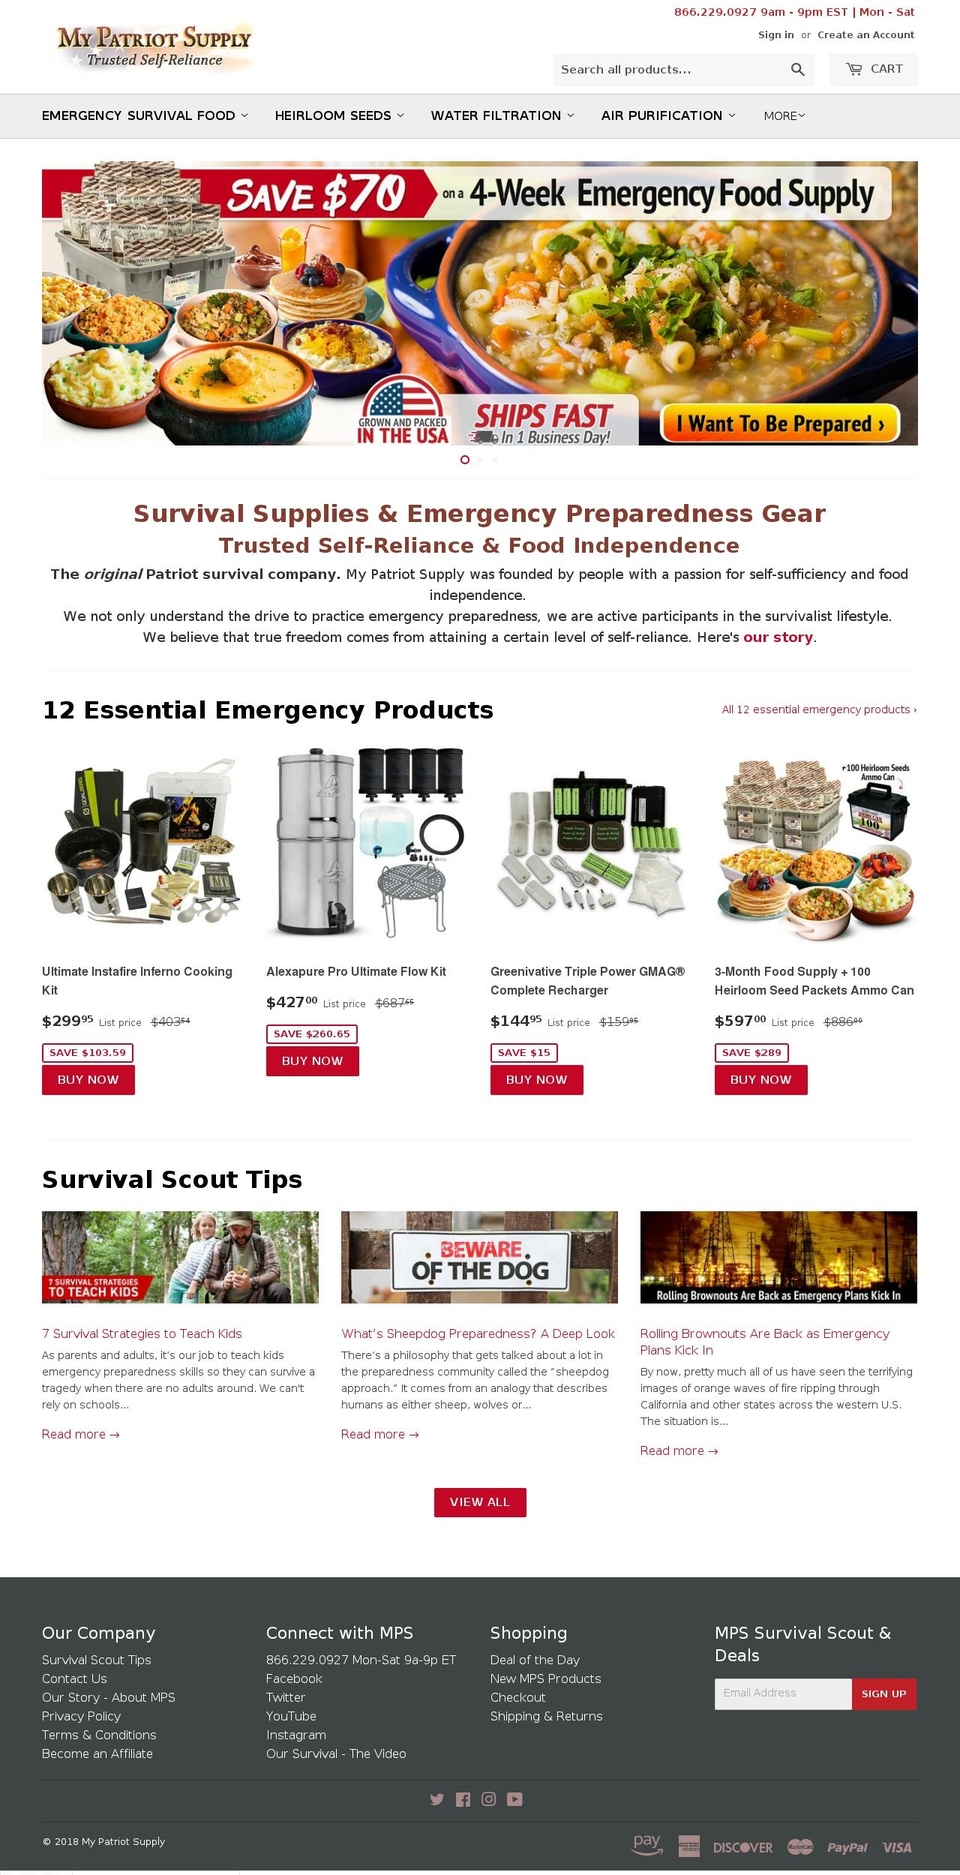 Supply HC - 27 Apr '18 [Plus] Removed 5% Shopify theme site example 911survivalfood.com